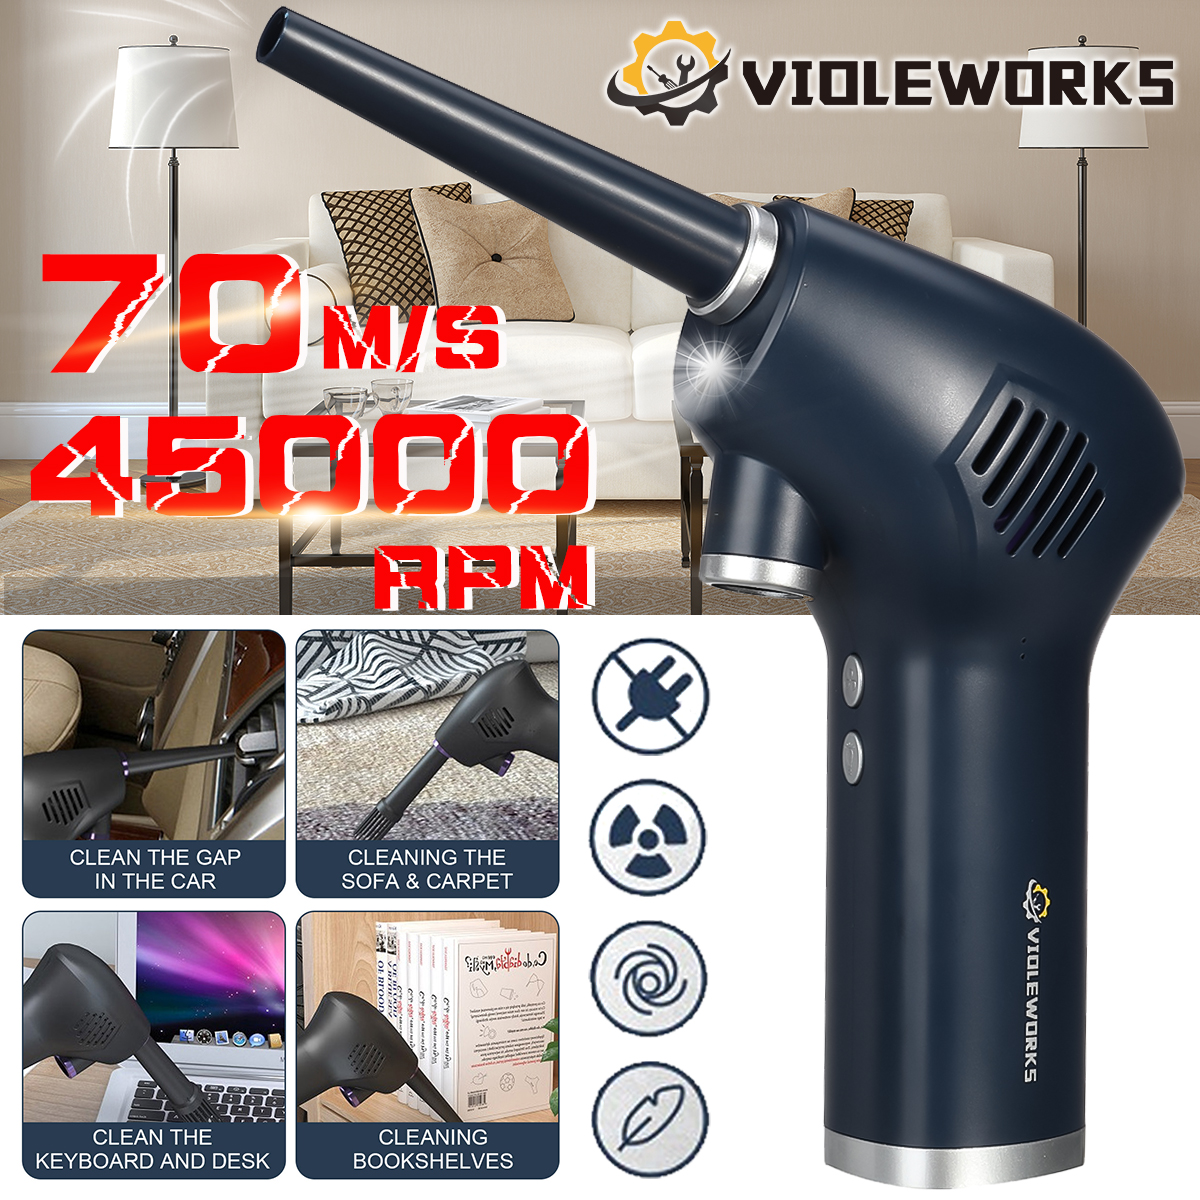 VIOLEWORKS-45000RPM-Cordless-Air-Duster-Air-Blower-High-Pressure-Cleaner-for-Computer-Car-Cleaning-T-1851018-2